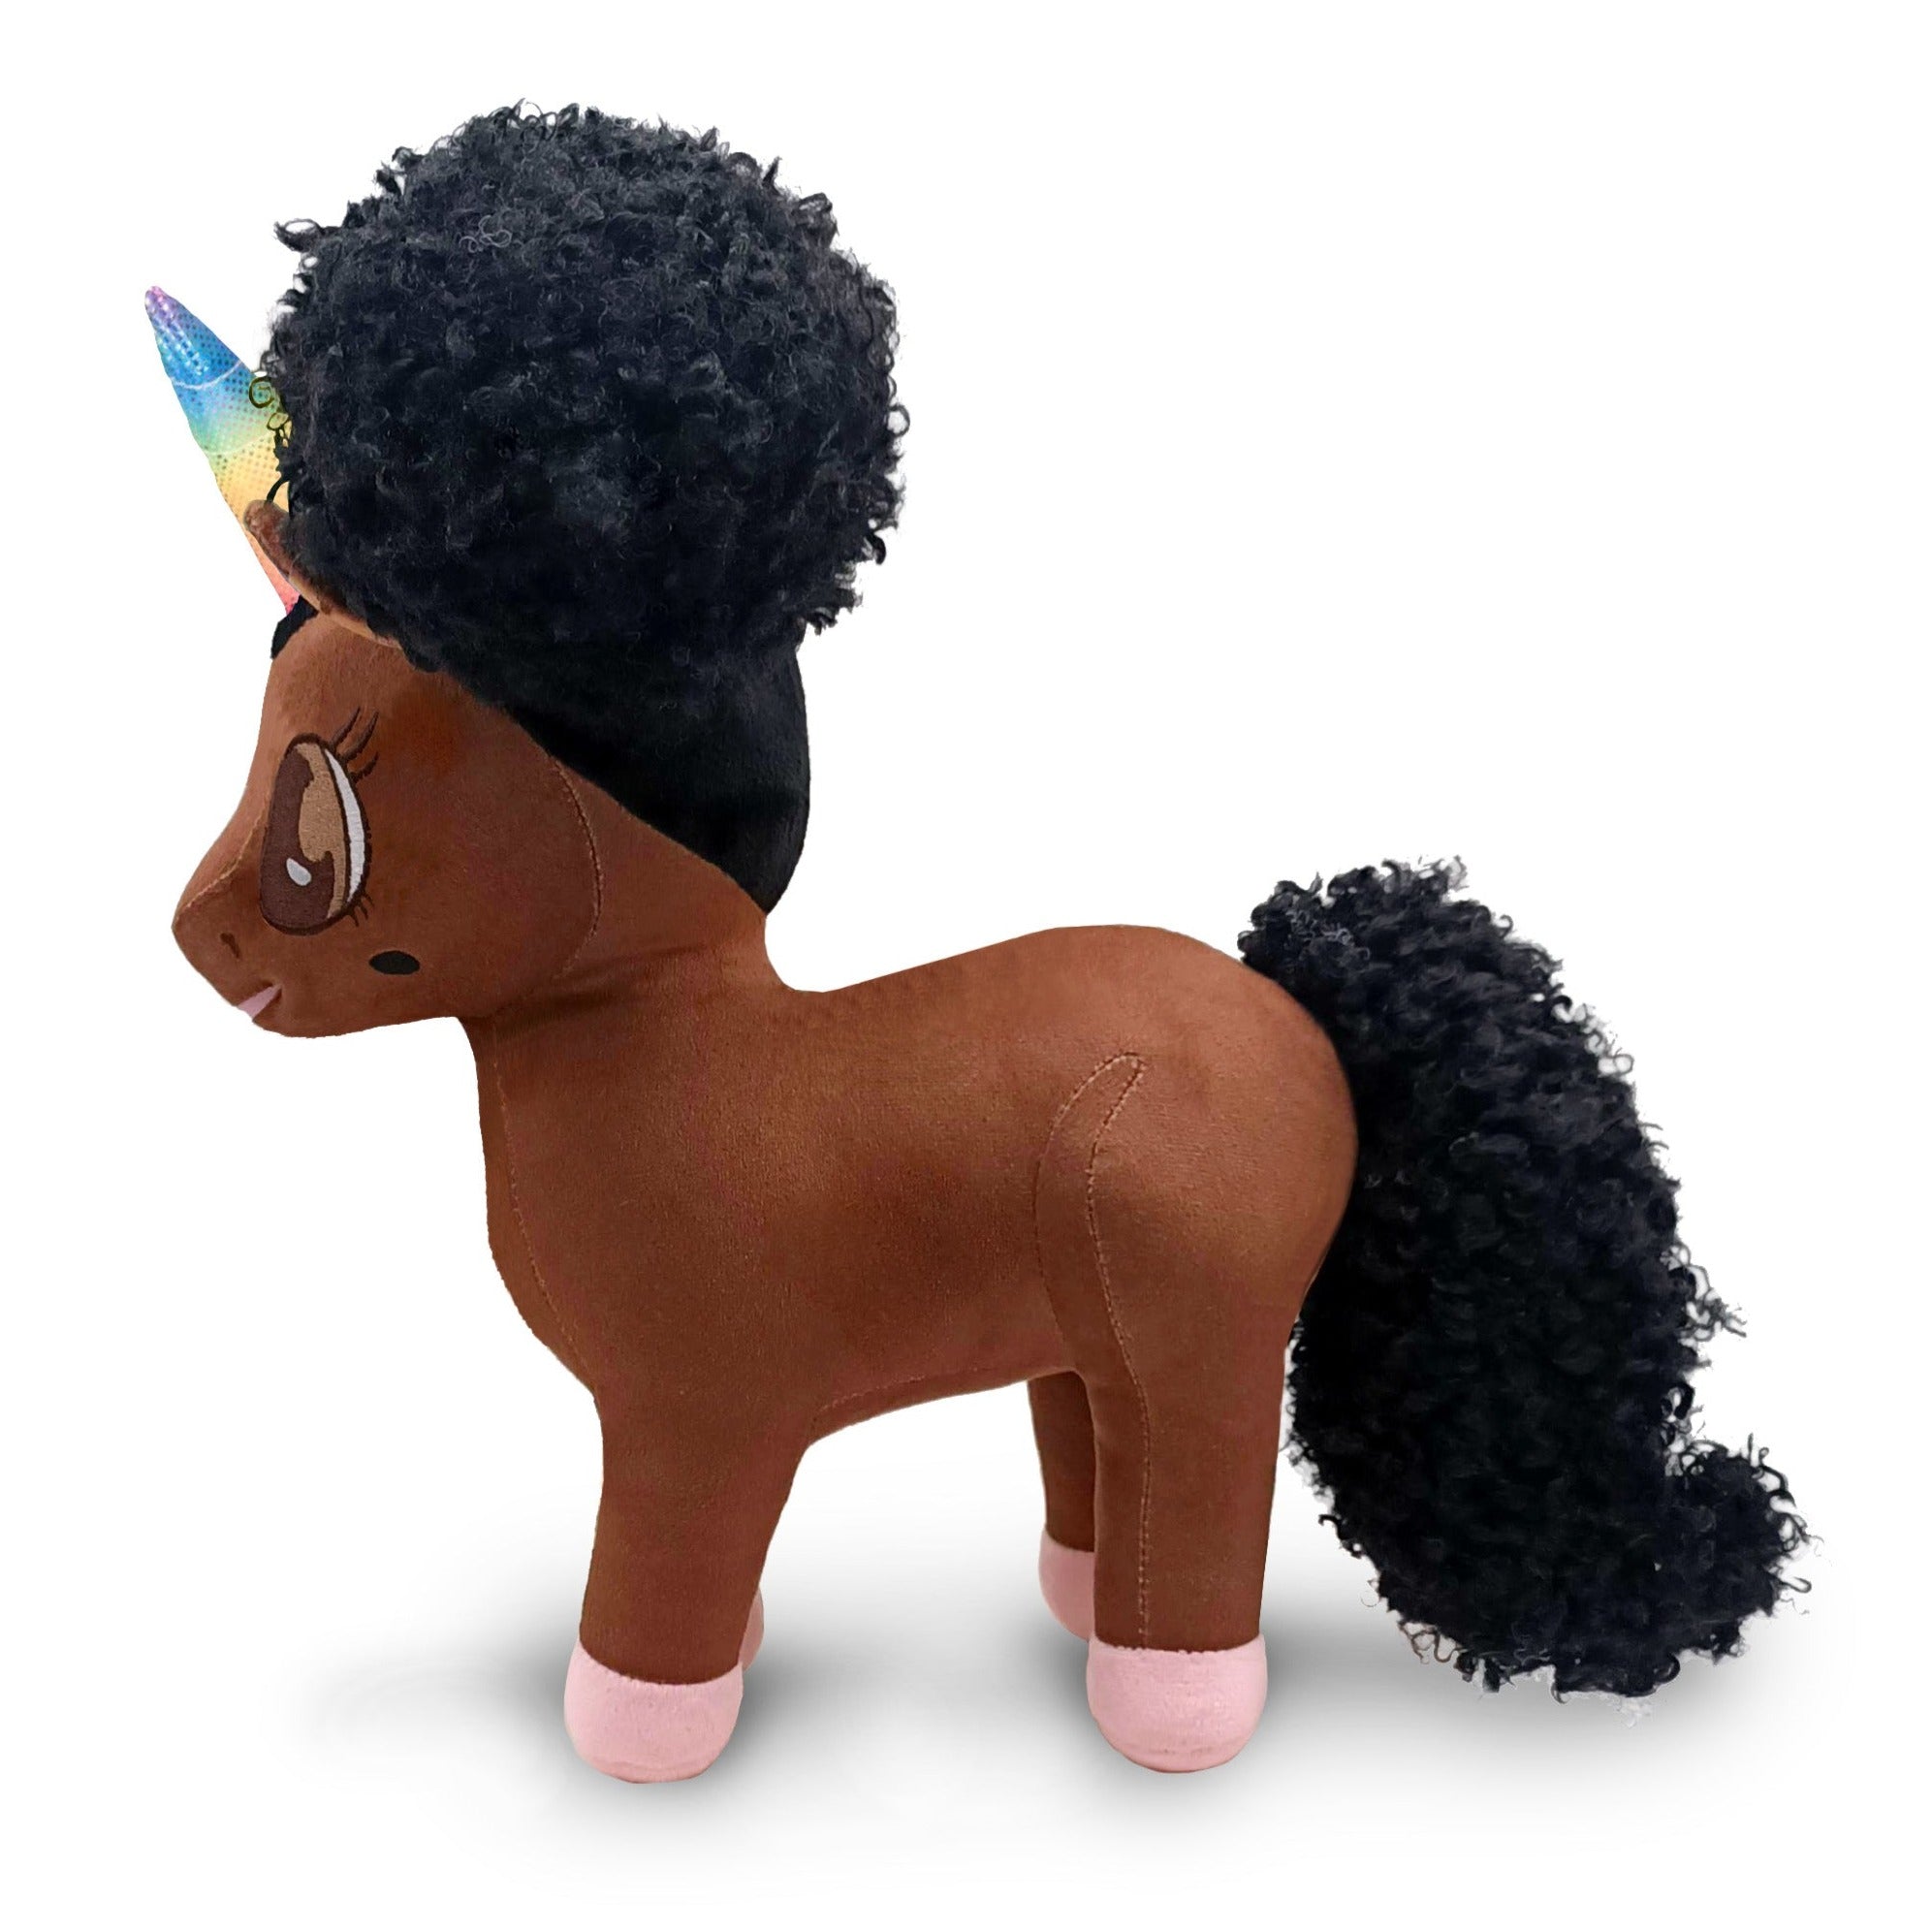 Chloe Unicorn Plush Toy with Afro Puffs - 15 inch